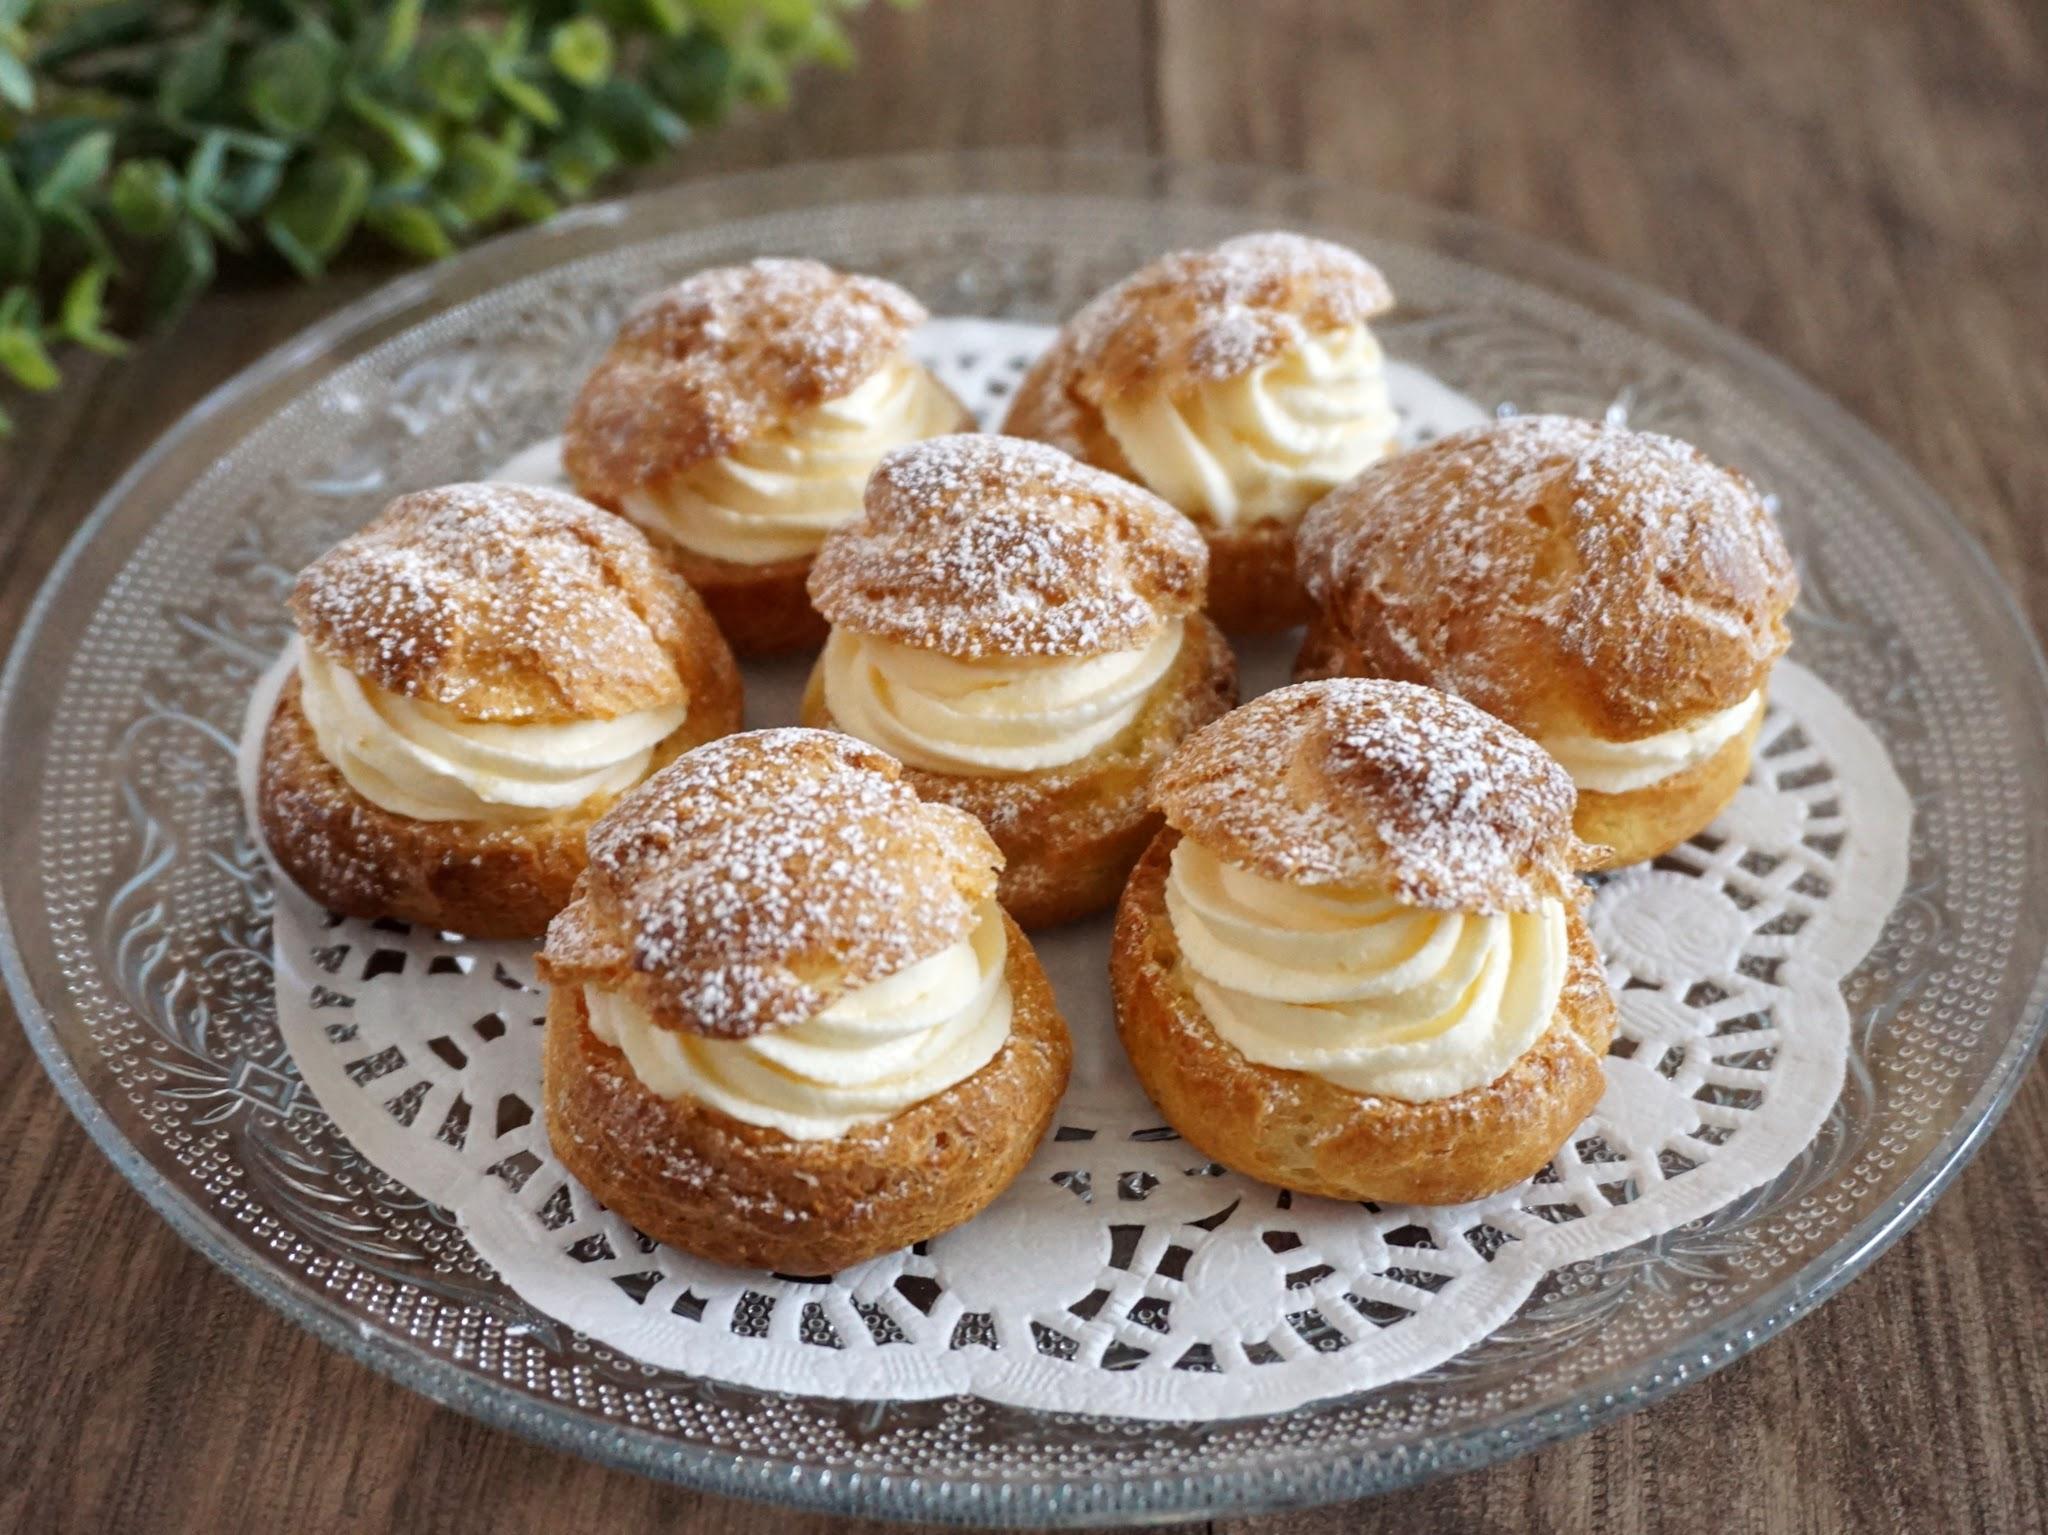 A plate of Japanese shuu-cream cream puffs, filled with custard and topped with powdered sugar.